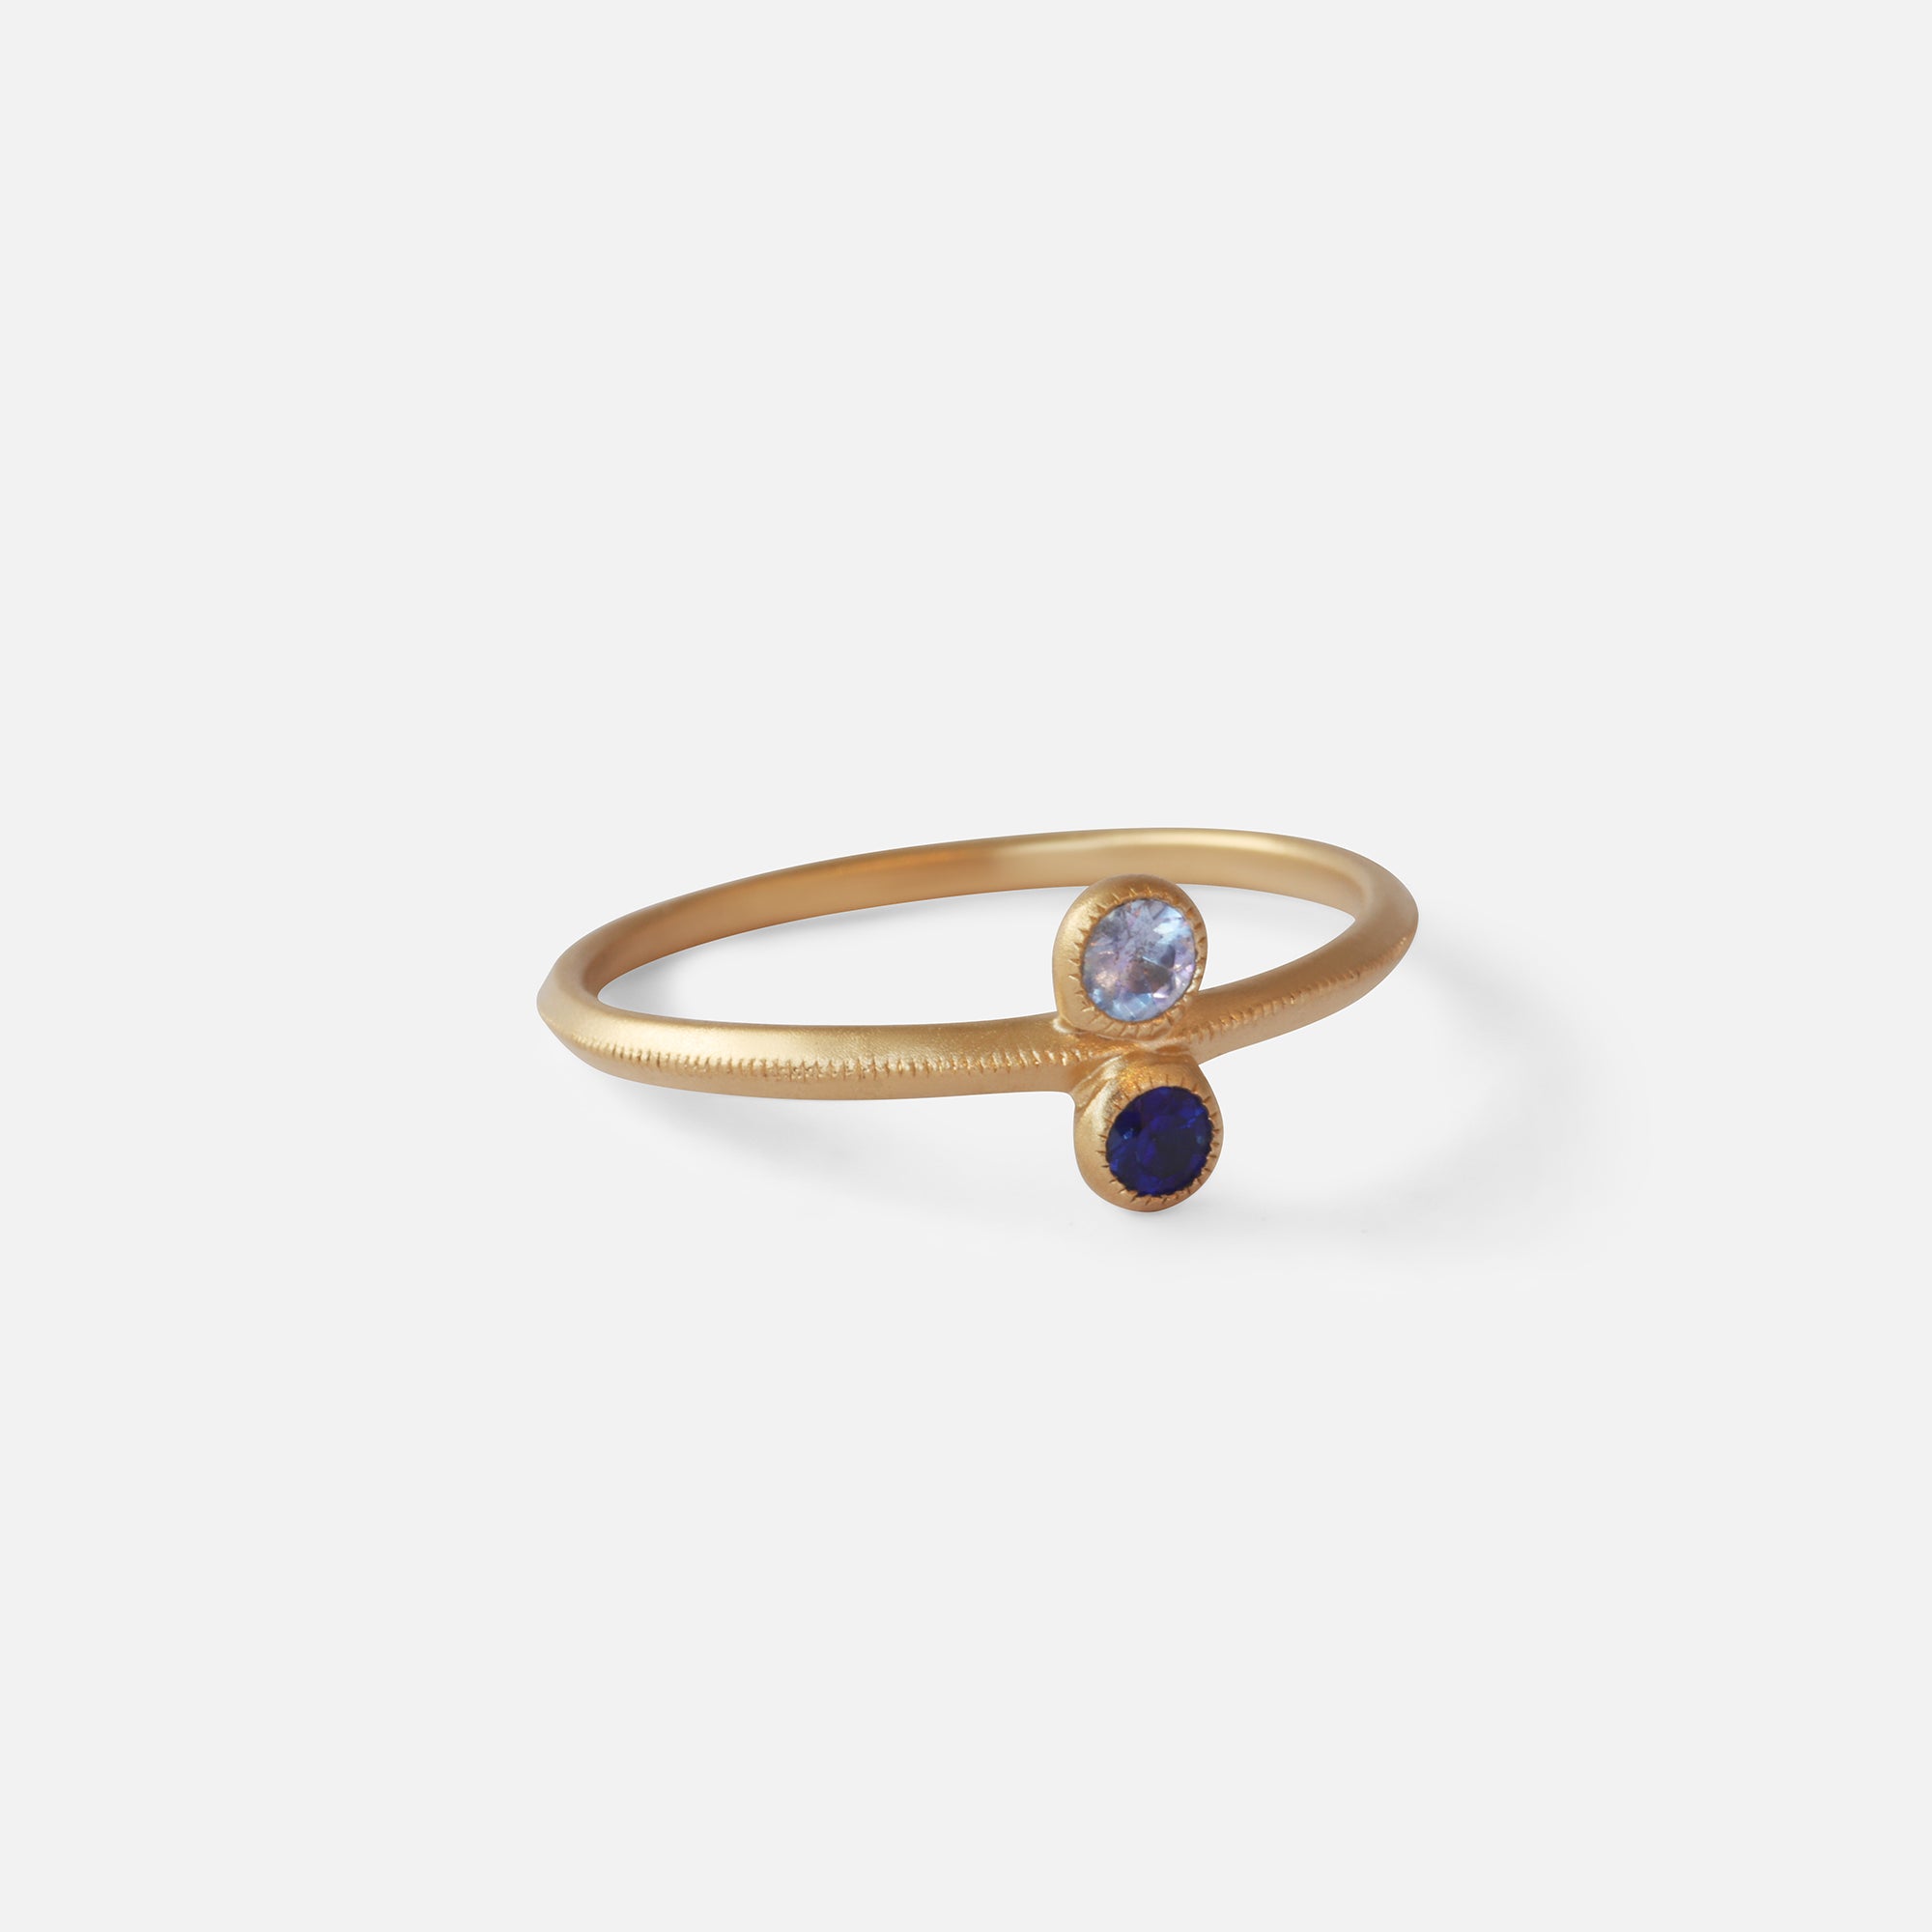 Melee Ball / Toi et Moi / Blue and Light Blue Sapphire Ring By fitzgerald jewelry in rings Category